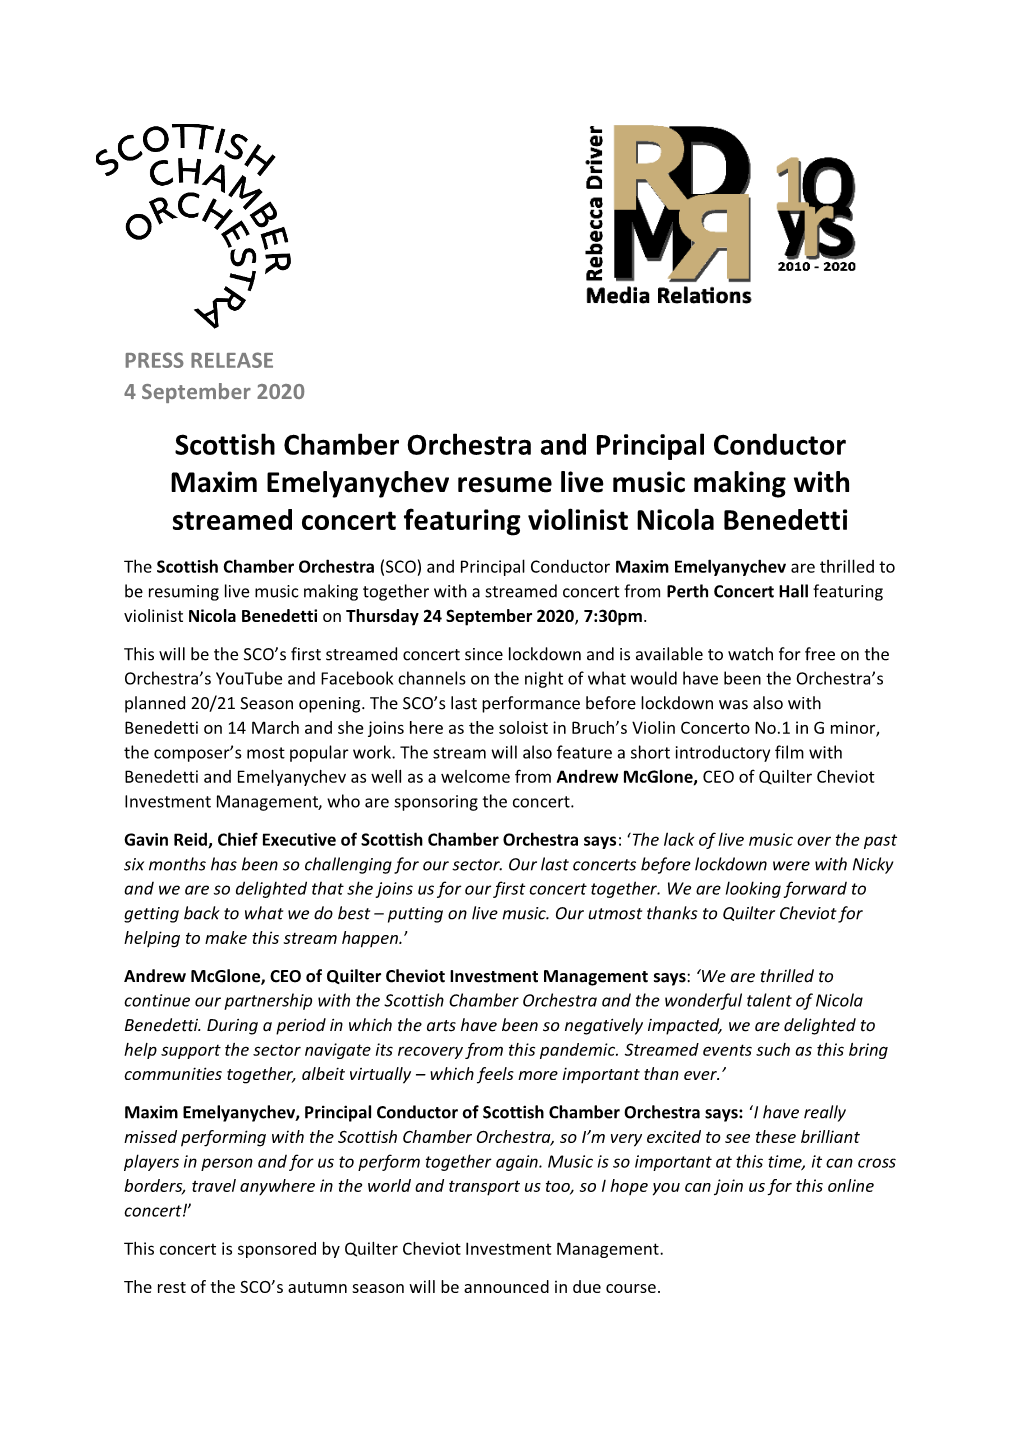 Scottish Chamber Orchestra and Principal Conductor Maxim Emelyanychev Resume Live Music Making with Streamed Concert Featuring Violinist Nicola Benedetti